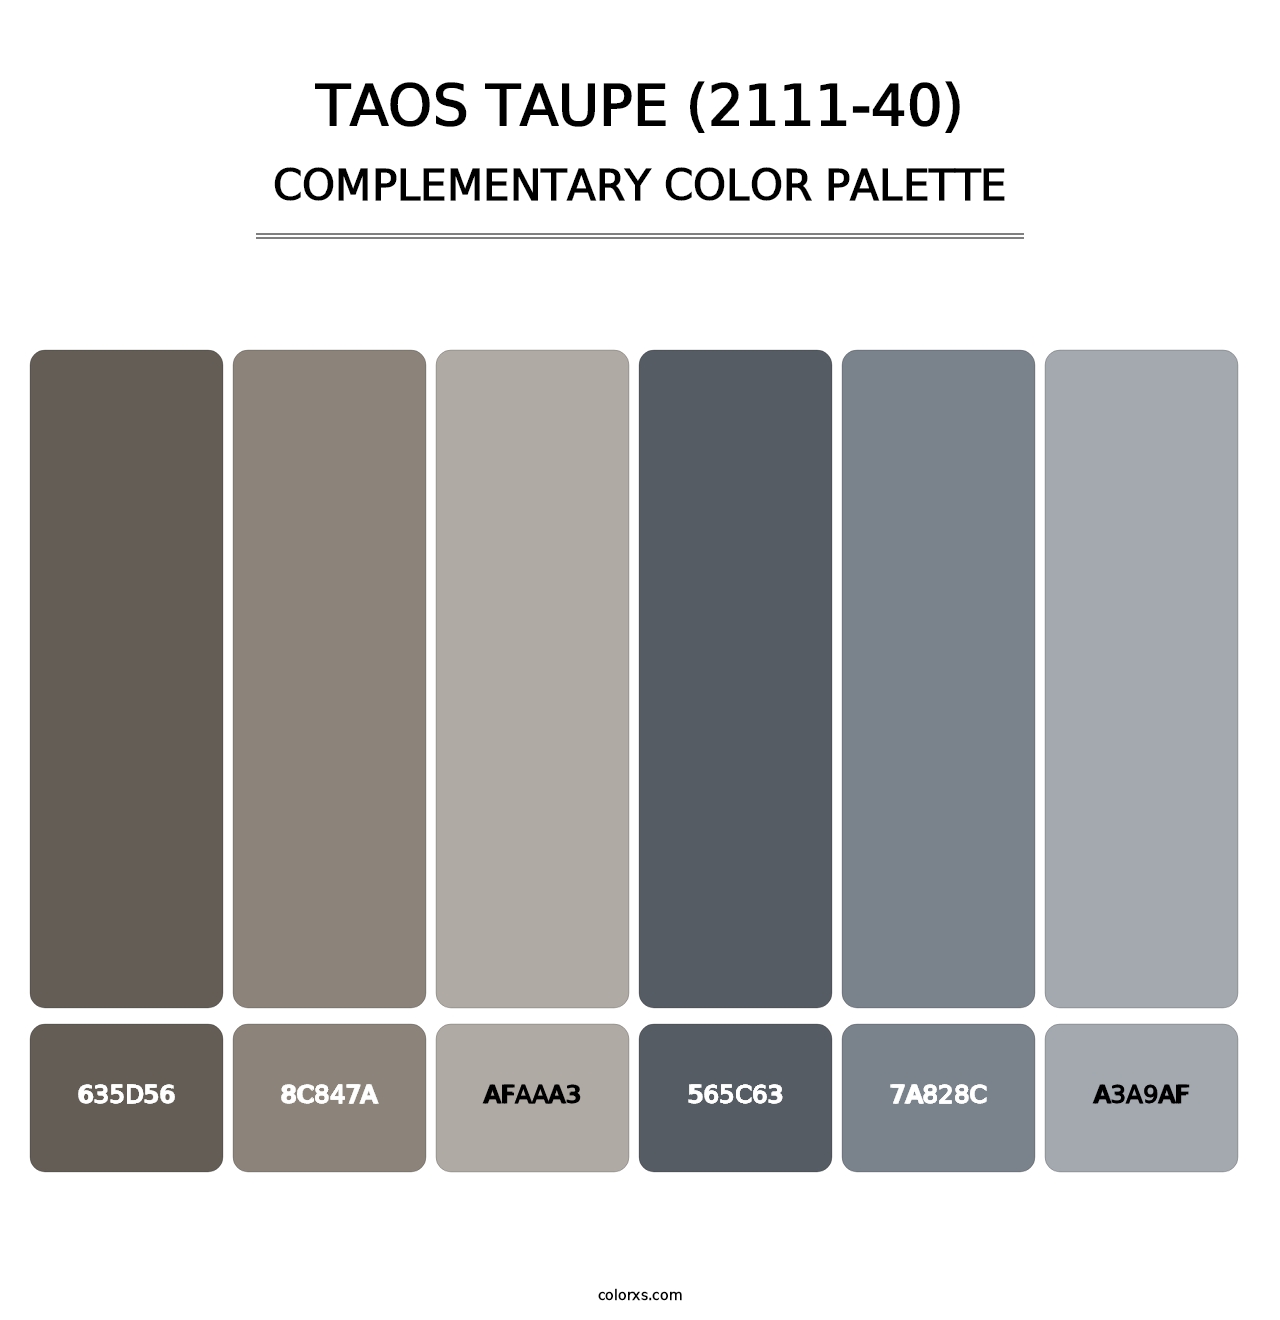 Taos Taupe (2111-40) - Complementary Color Palette